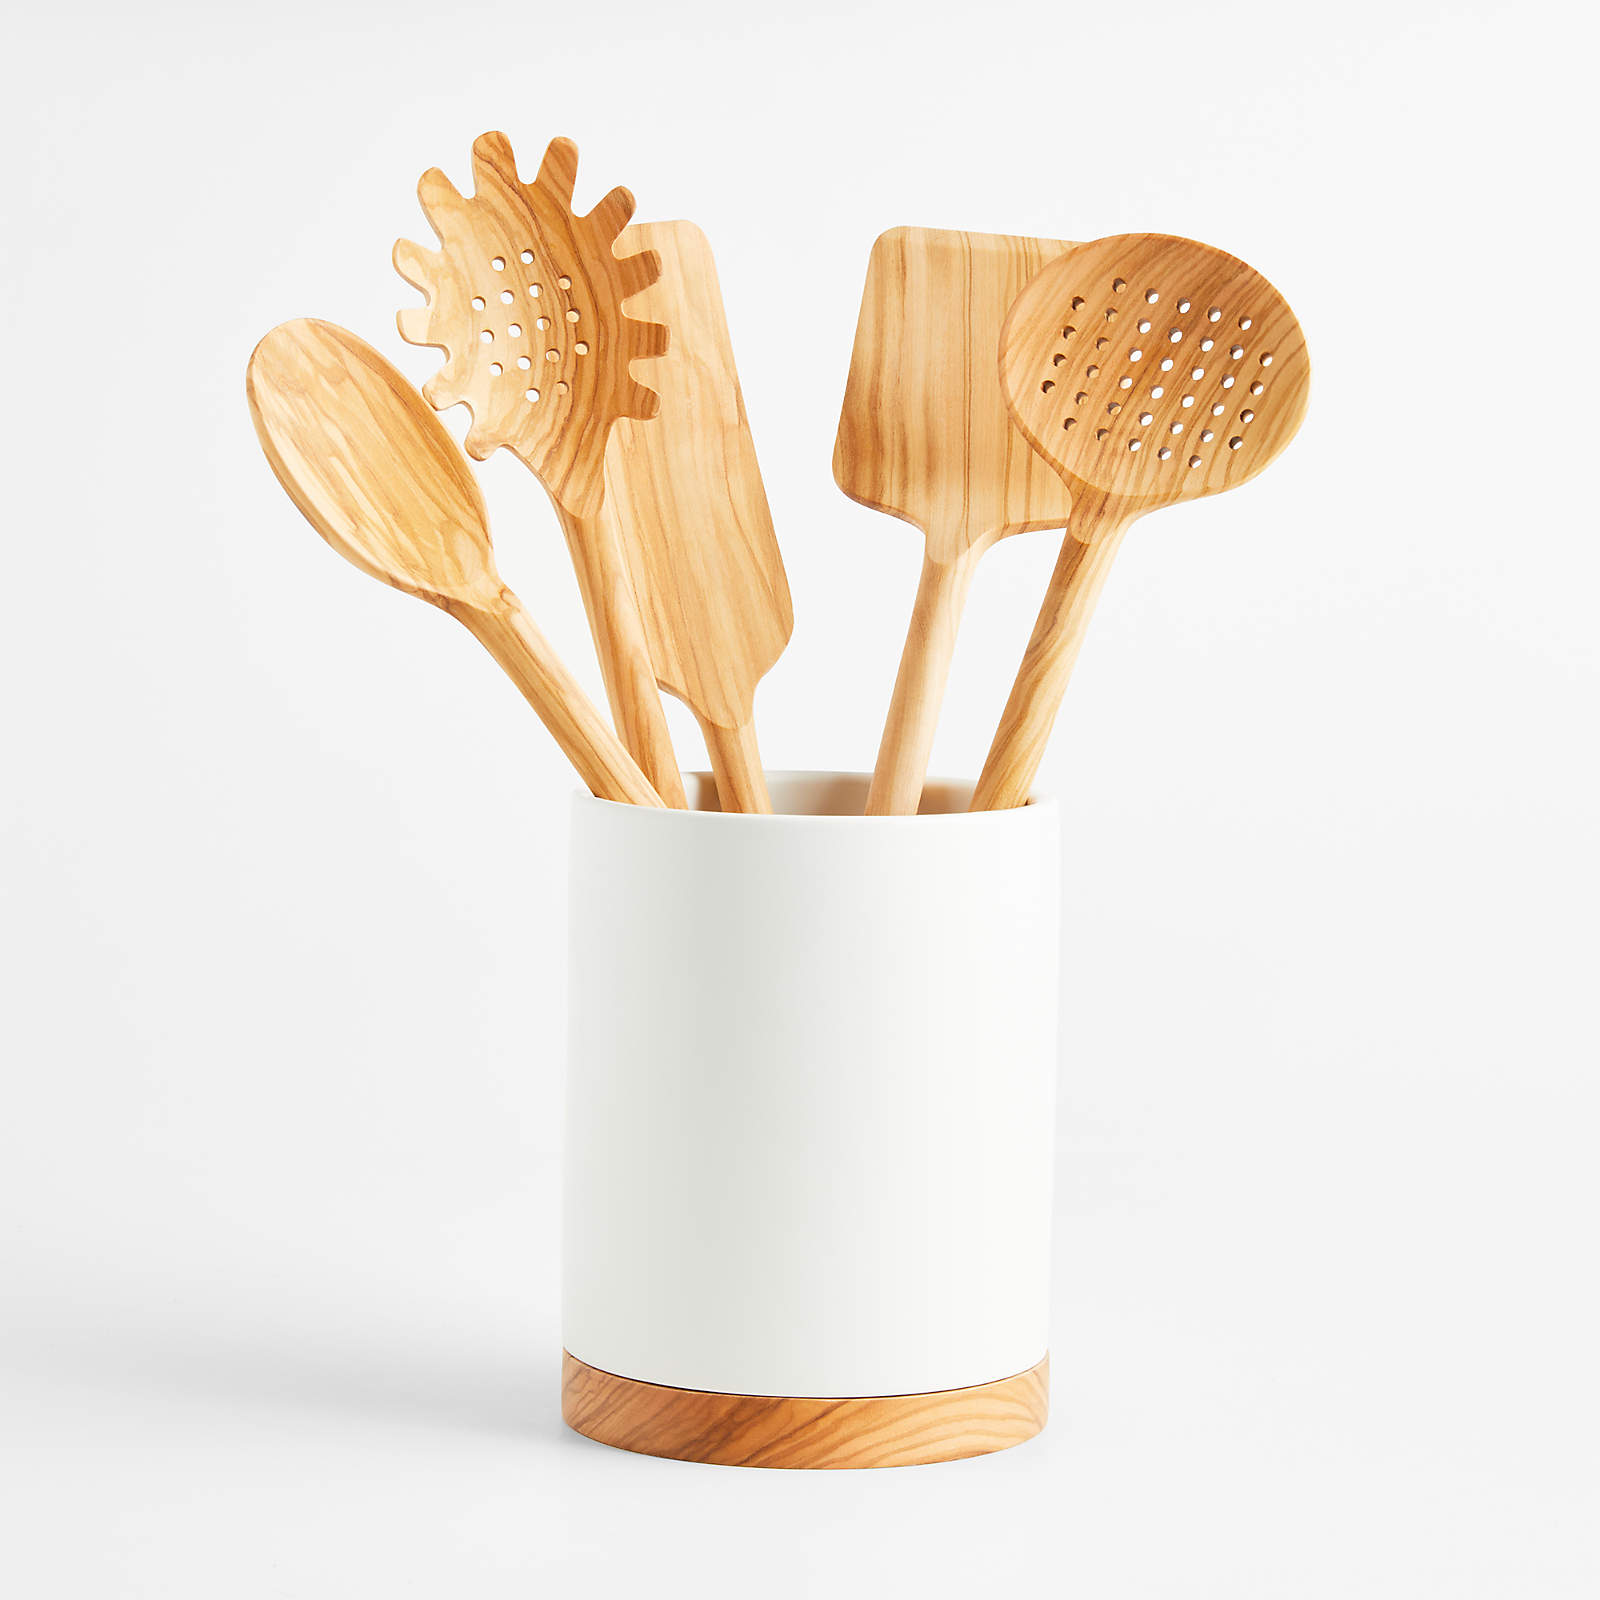 https://www.retail-kitchen.com/wp-content/uploads/2023/02/crate-and-barrel-olivewood-utensils-with-holder-set-of-6.jpg